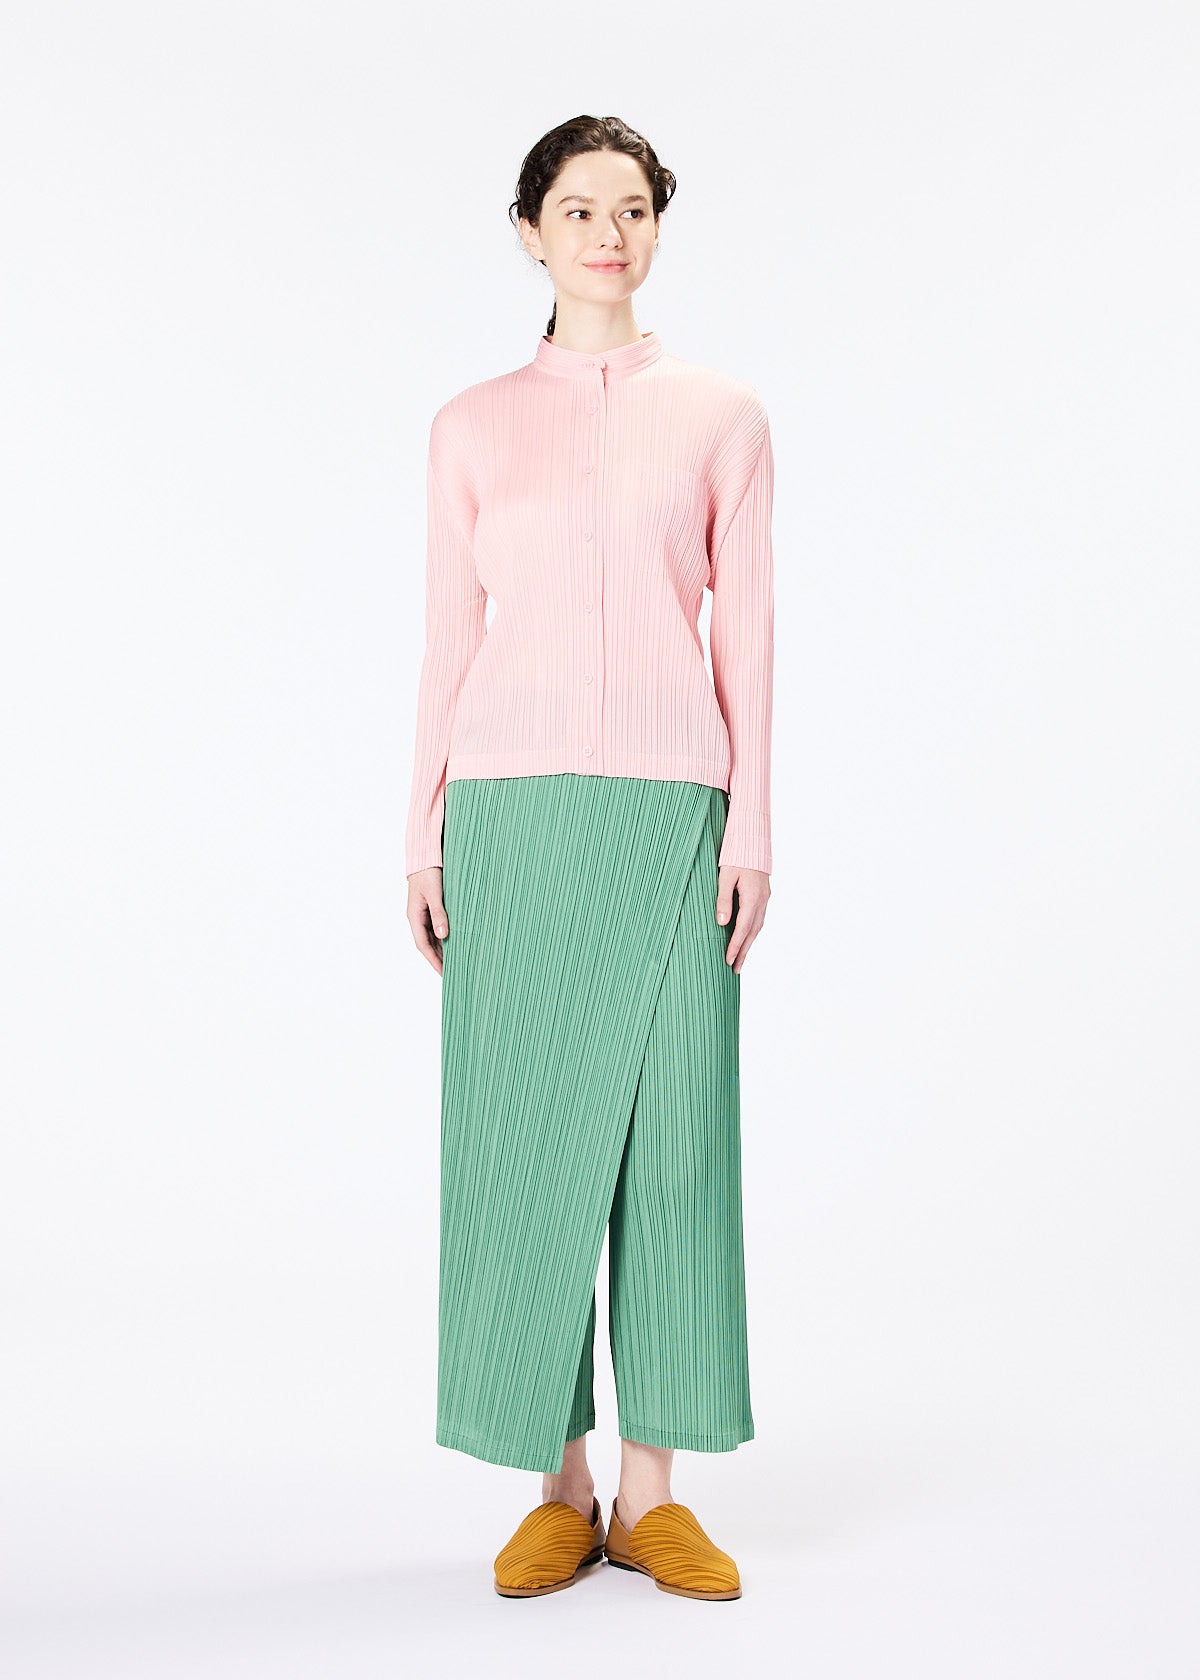 MONTHLY COLORS : FEBRUARY TOP | The official ISSEY MIYAKE ONLINE